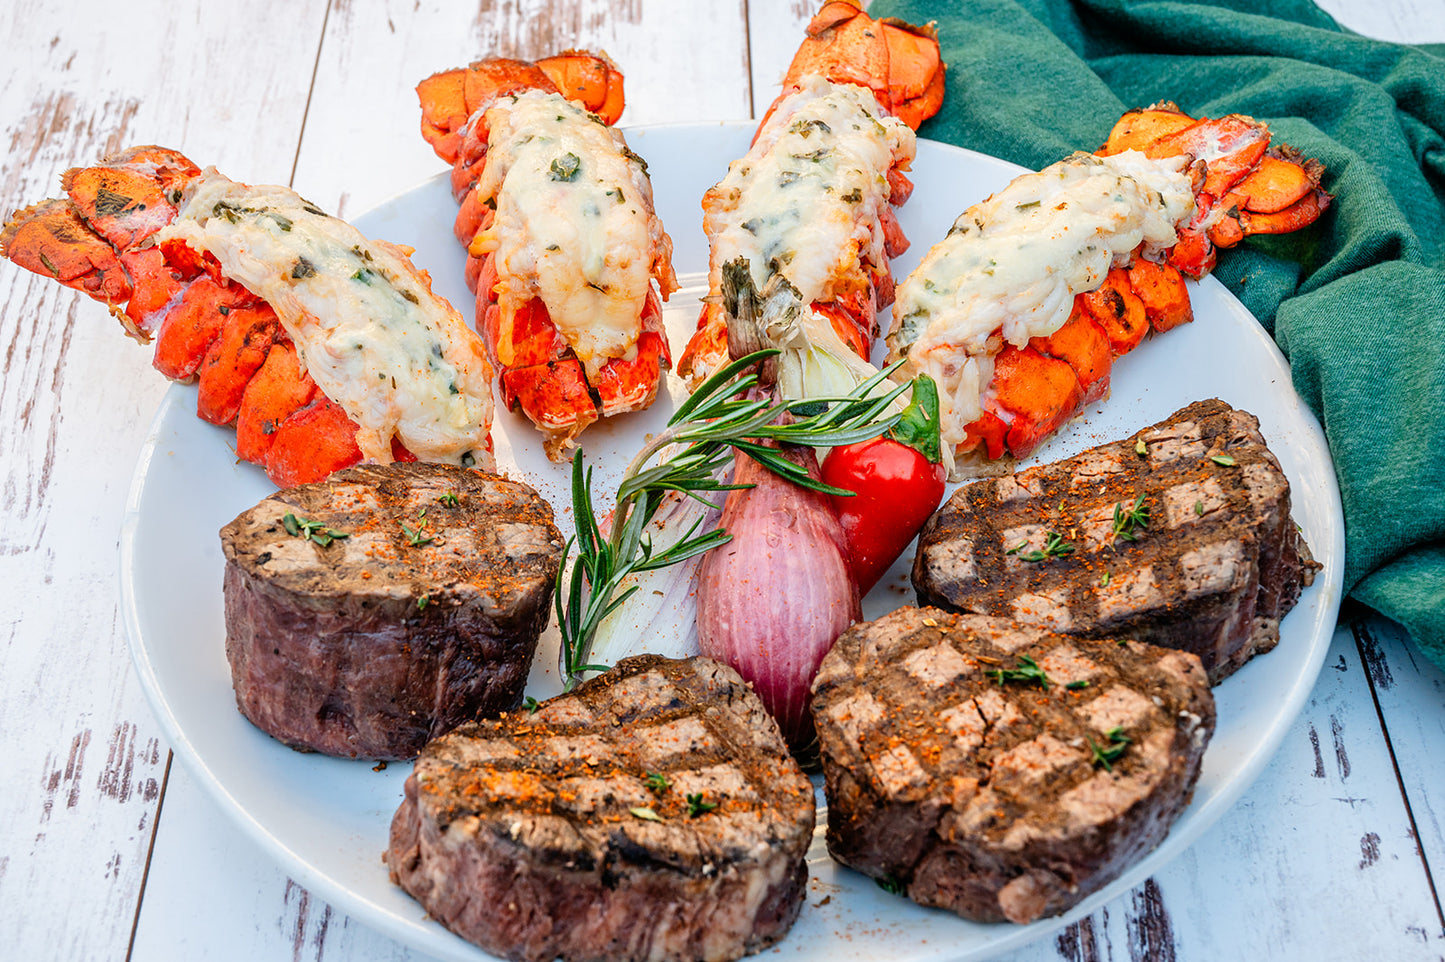 Filet Mignon and Lobster Tail Kit